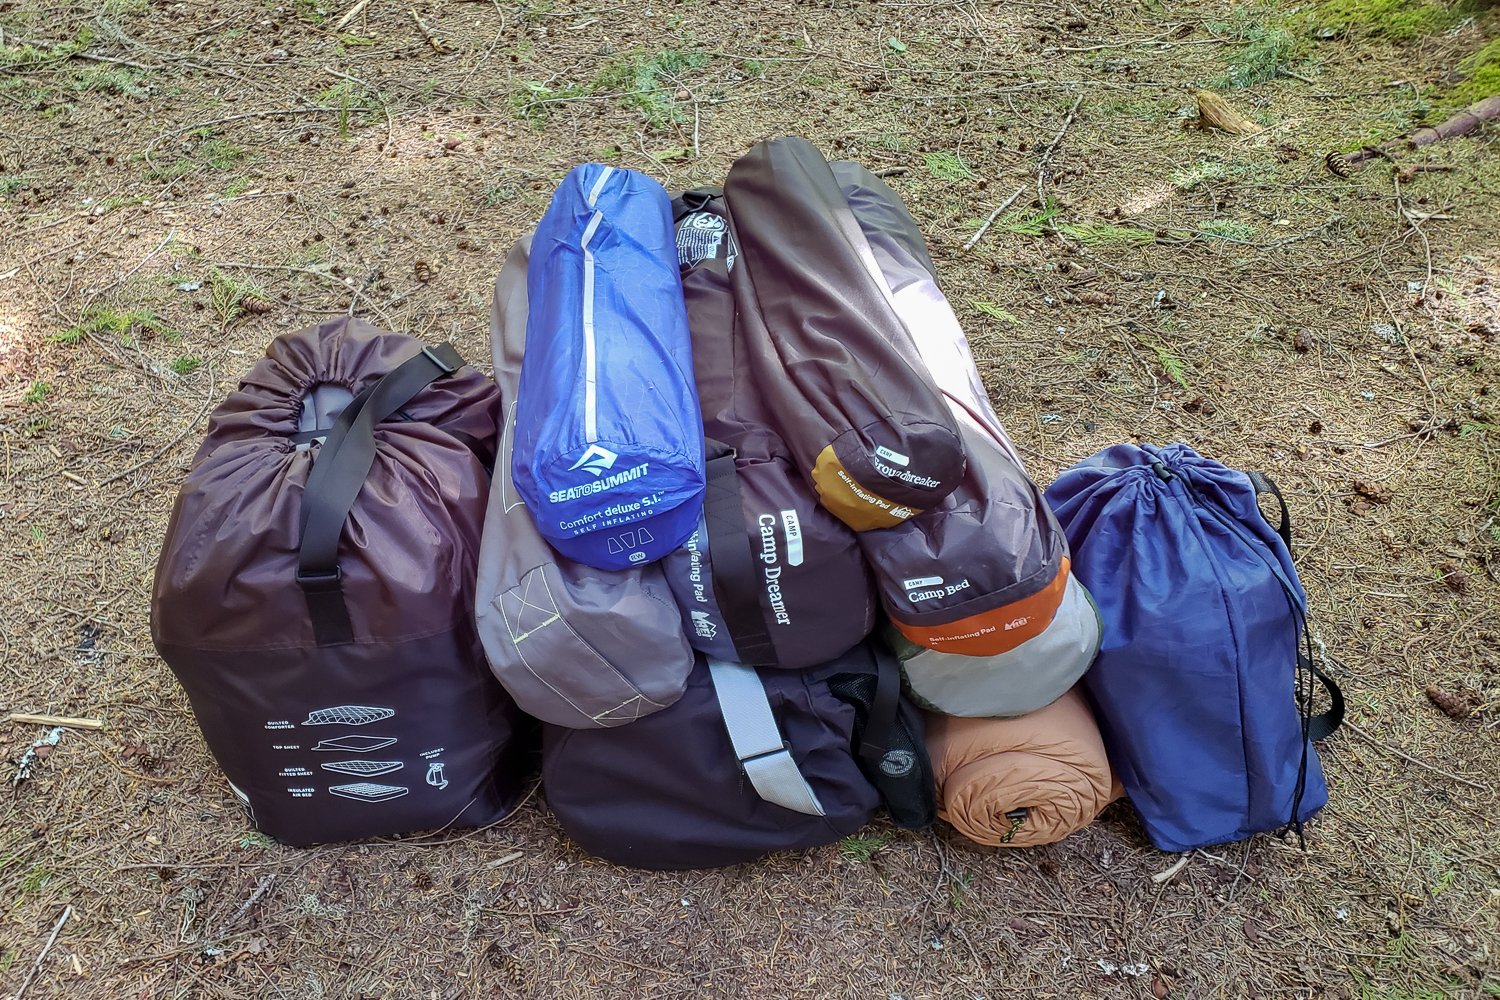 A pile of camping pads in their stuff sacks